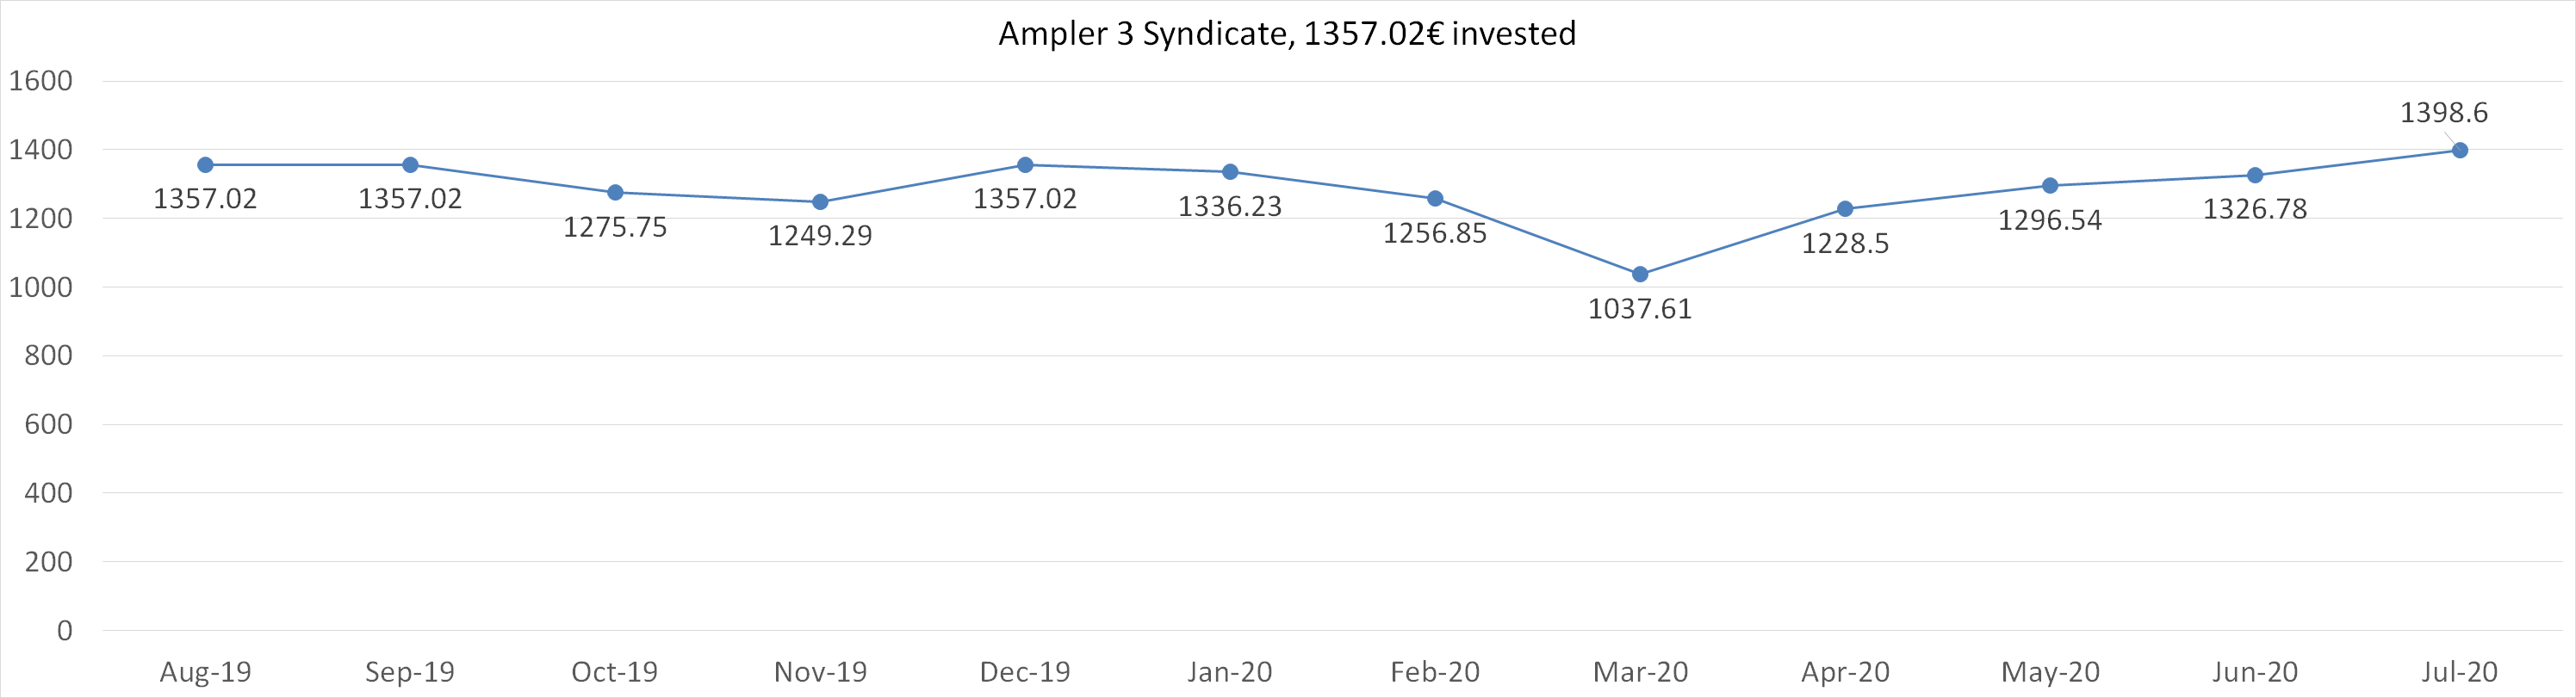 Ampler 3 syndicate, invested 1357,02 euros july 2020